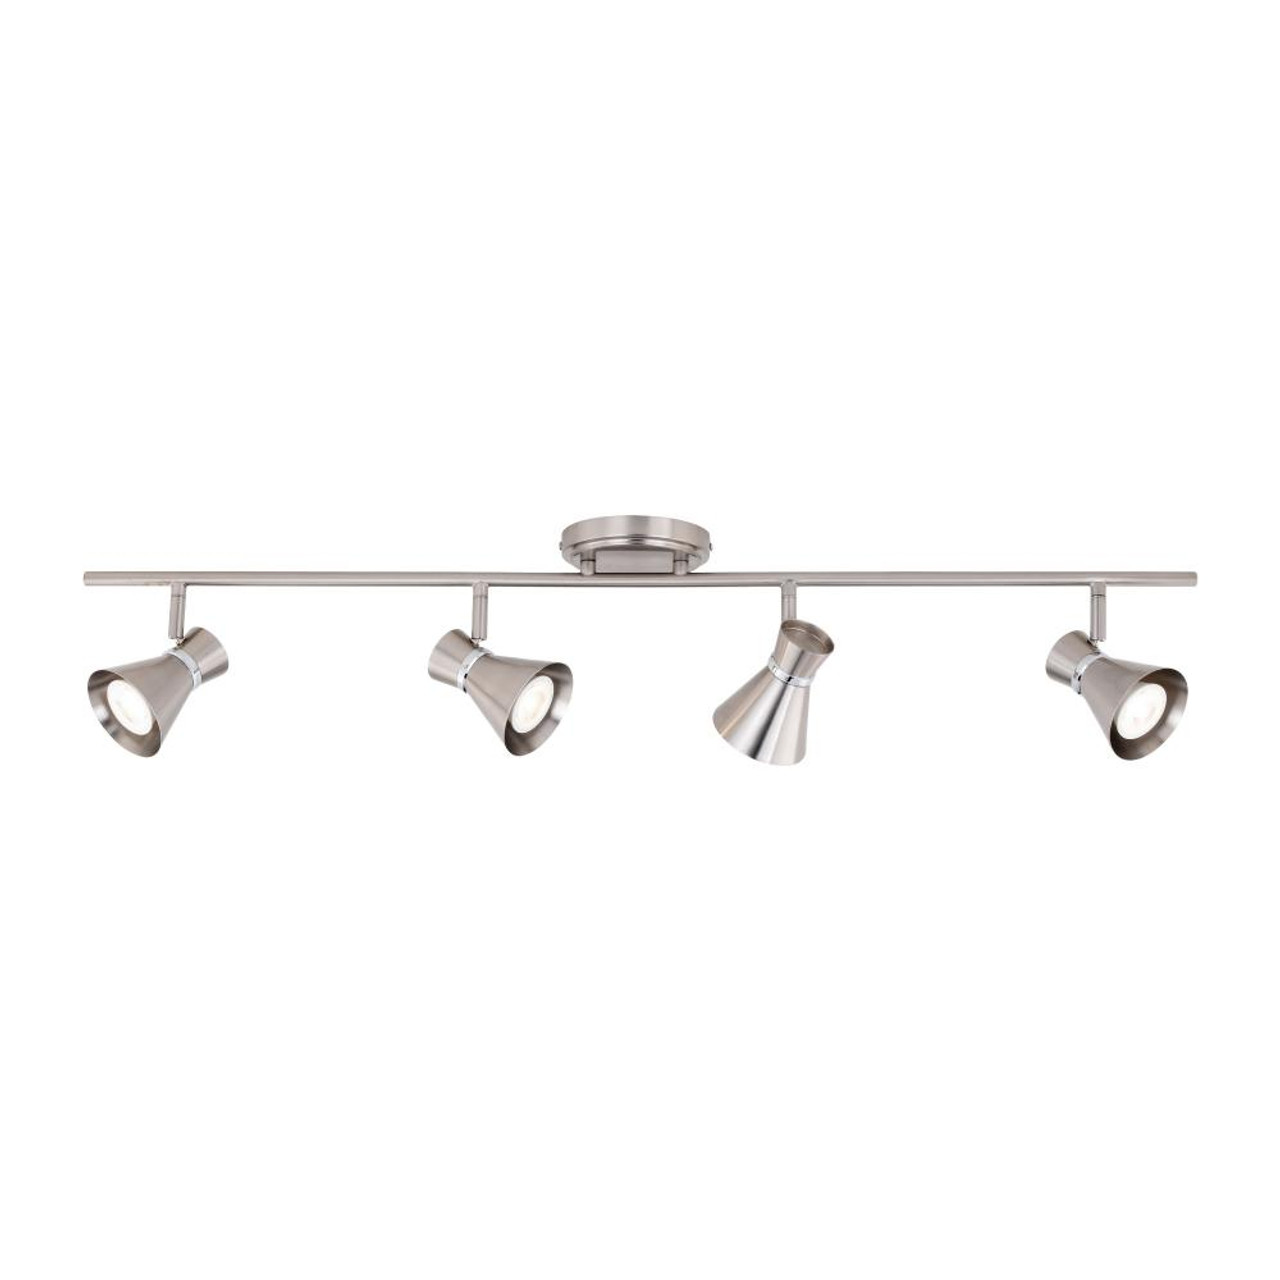 Alto 4L LED Directional Ceiling Light Brushed Nickel and Chrome, Vaxcel  International C0220 J3VC Vaxcel International Other Directional Light